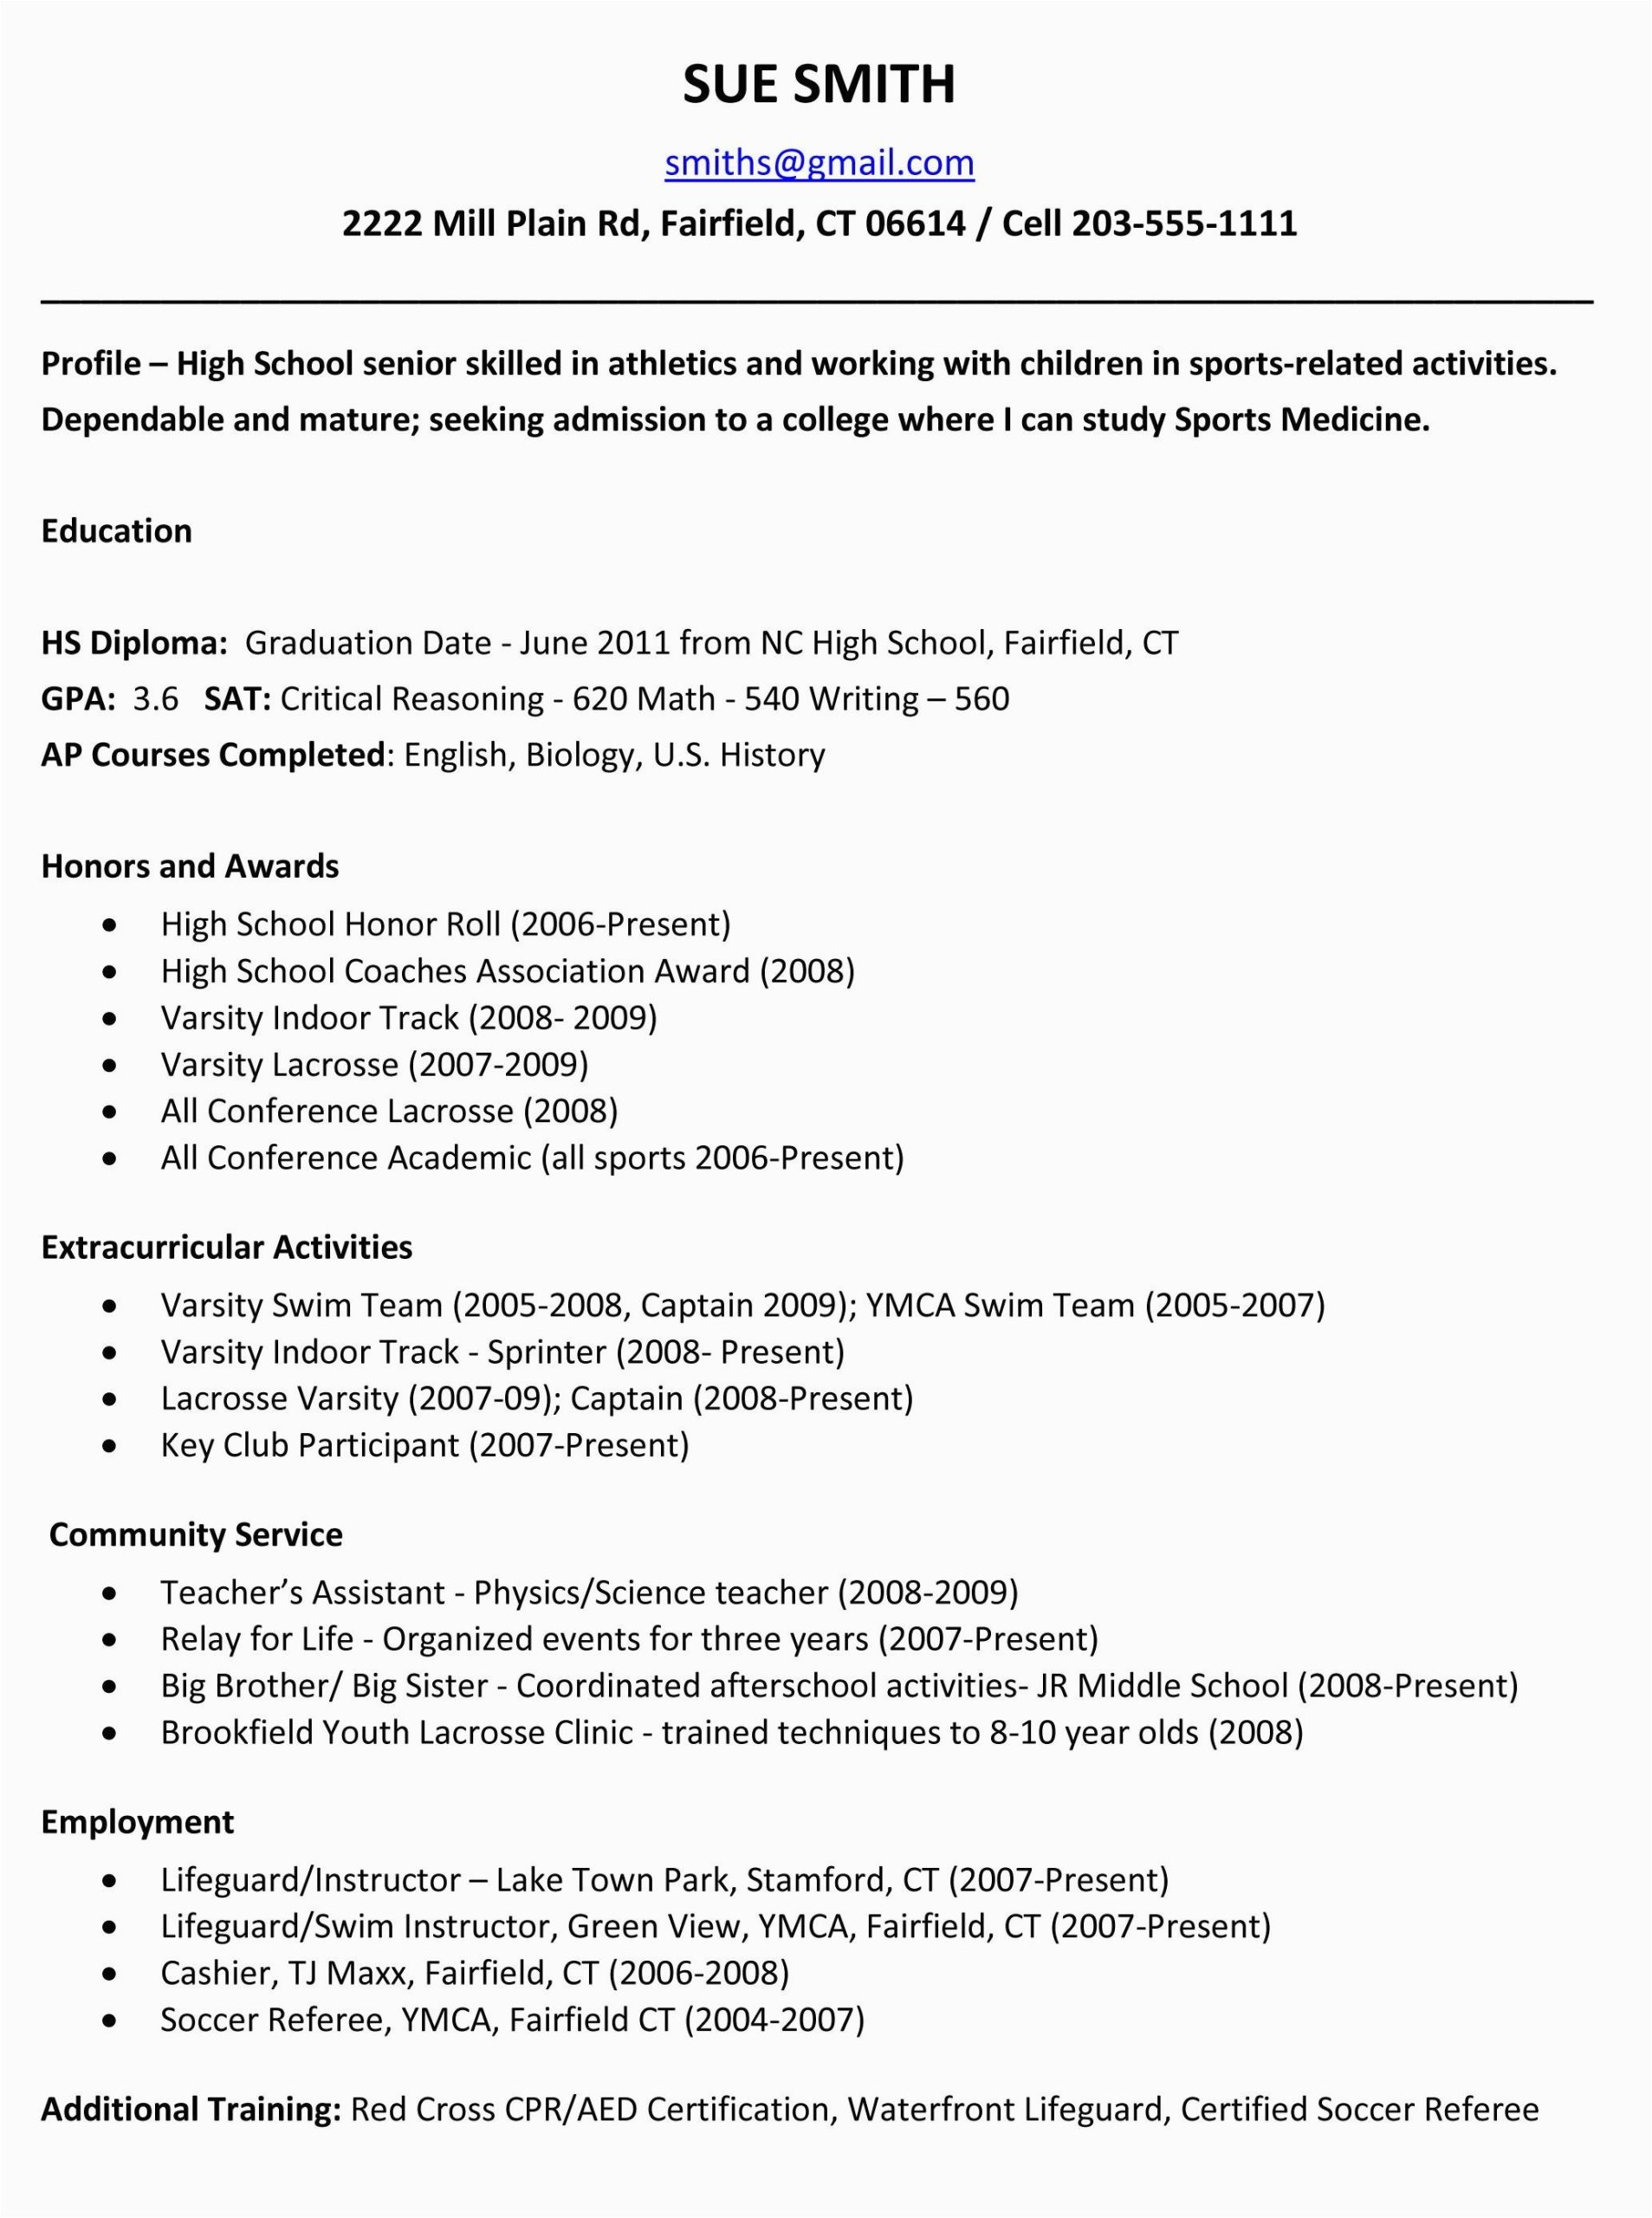 Sample Resume Objective Statements for High School Students Sample Resumes